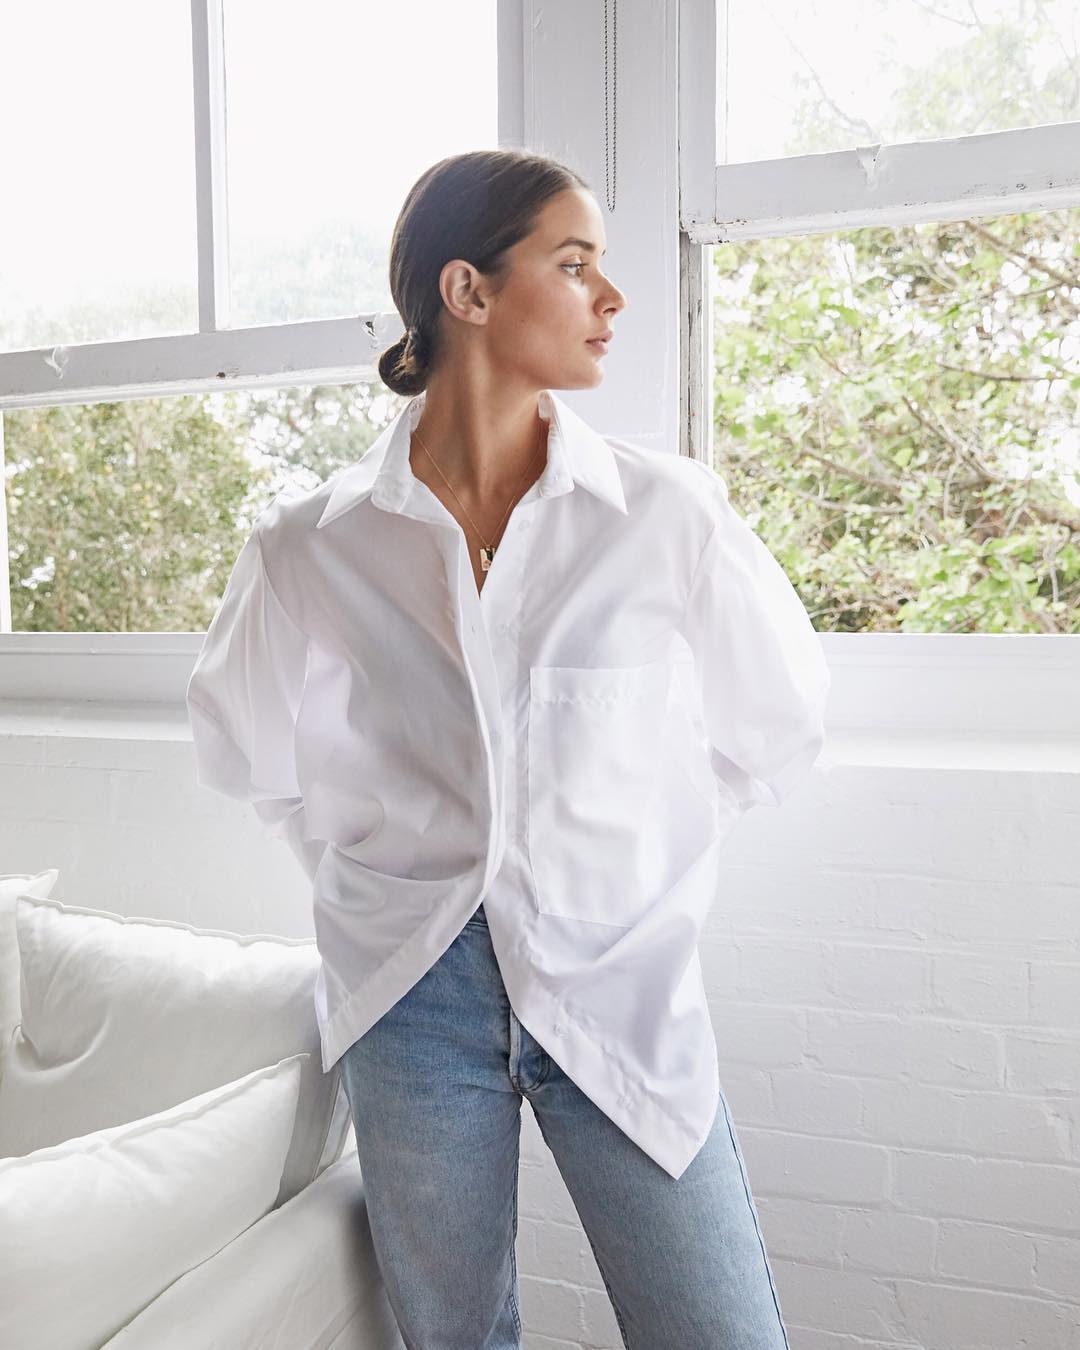 15 Crisp White Button-Down Shirts You Can Wear Year-Round — Sara Crampton of Harper & Harley with a low bun, white top, and jeans